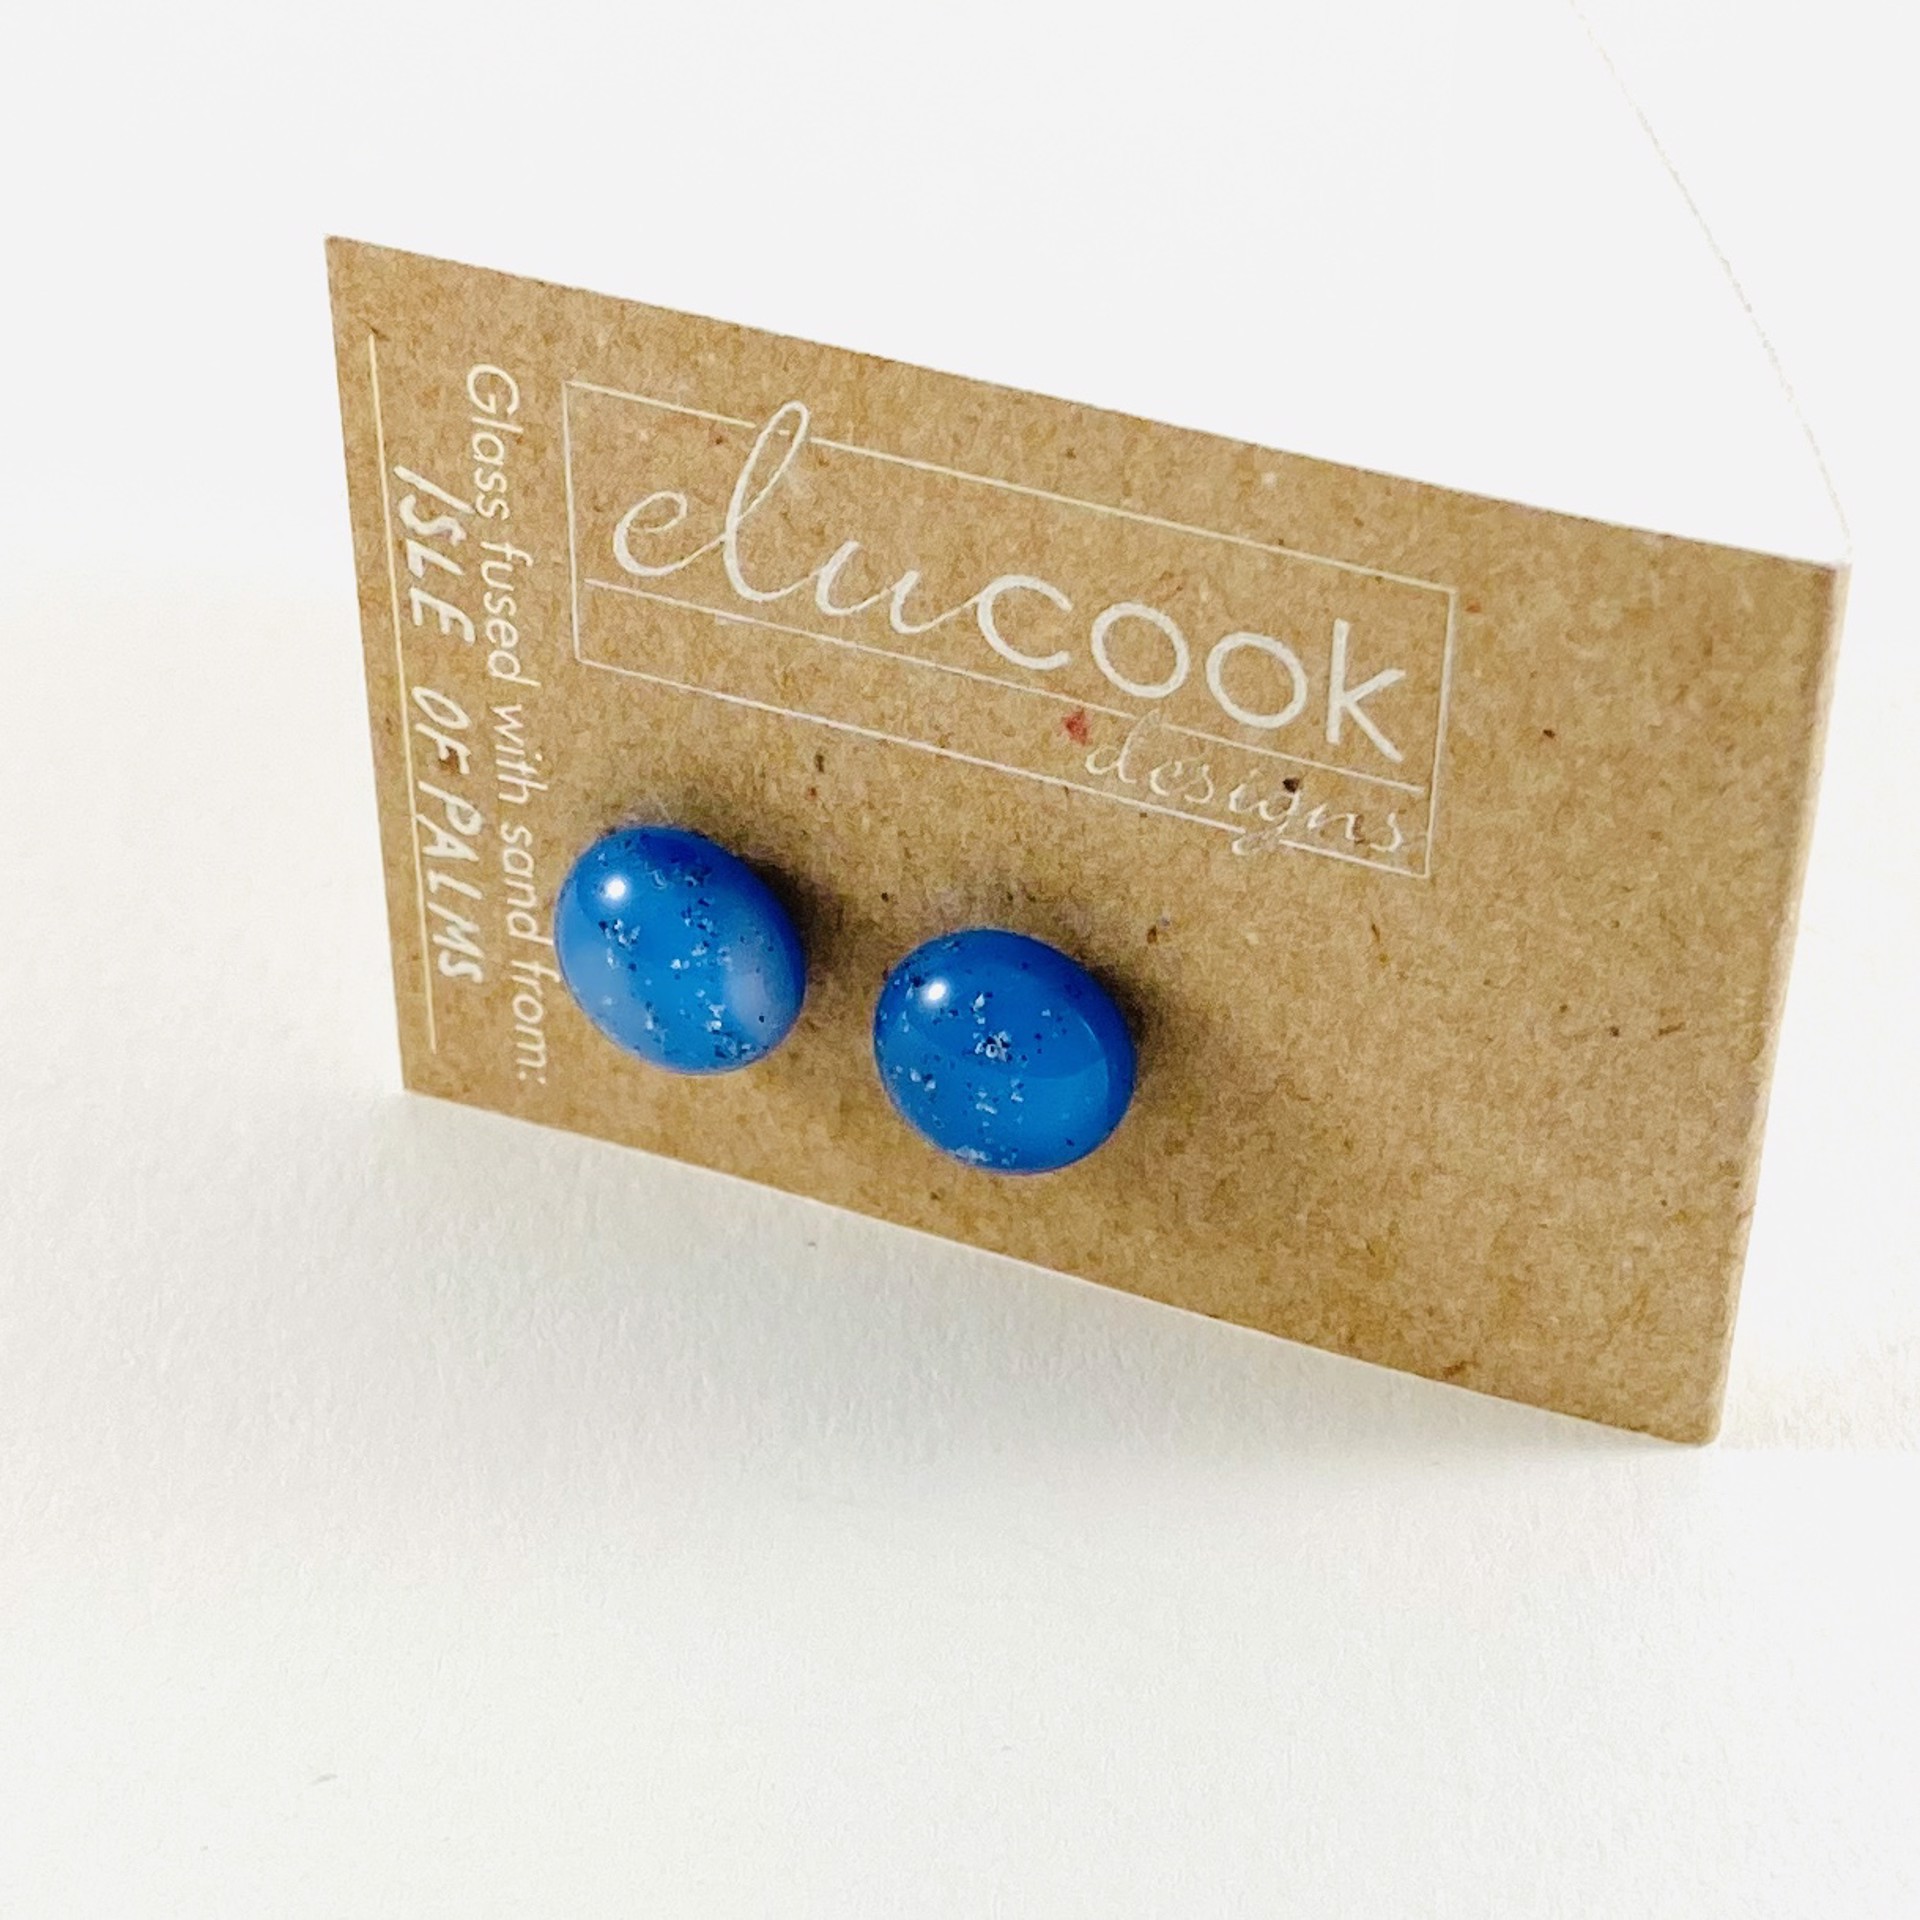 Button Earrings, 8k by Emily Cook